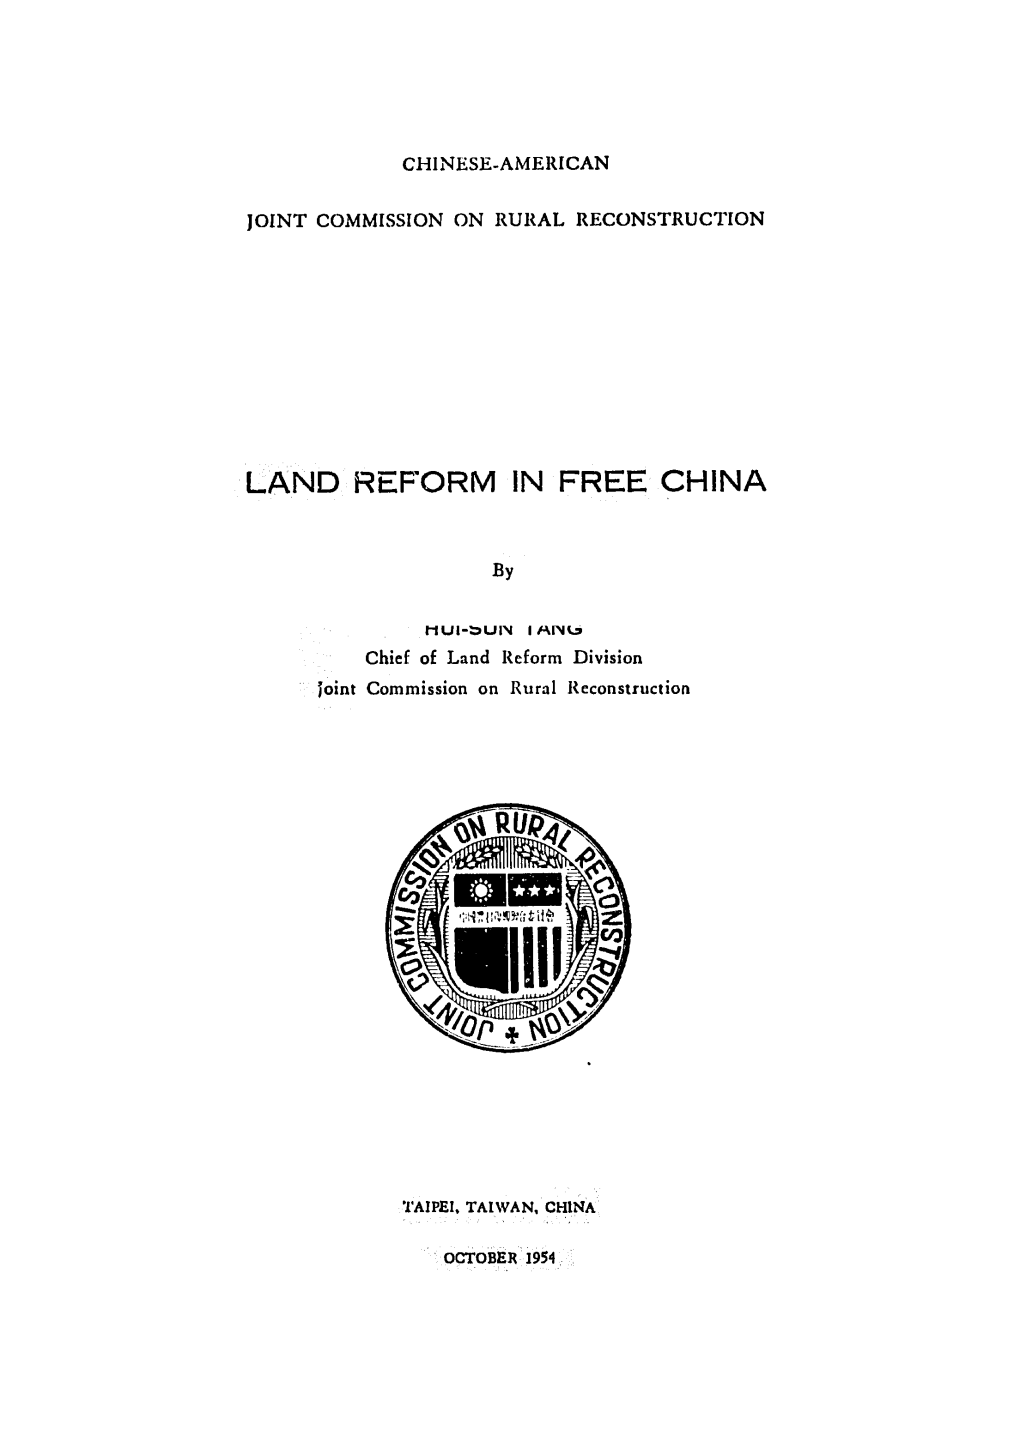 Land Reform in Free China